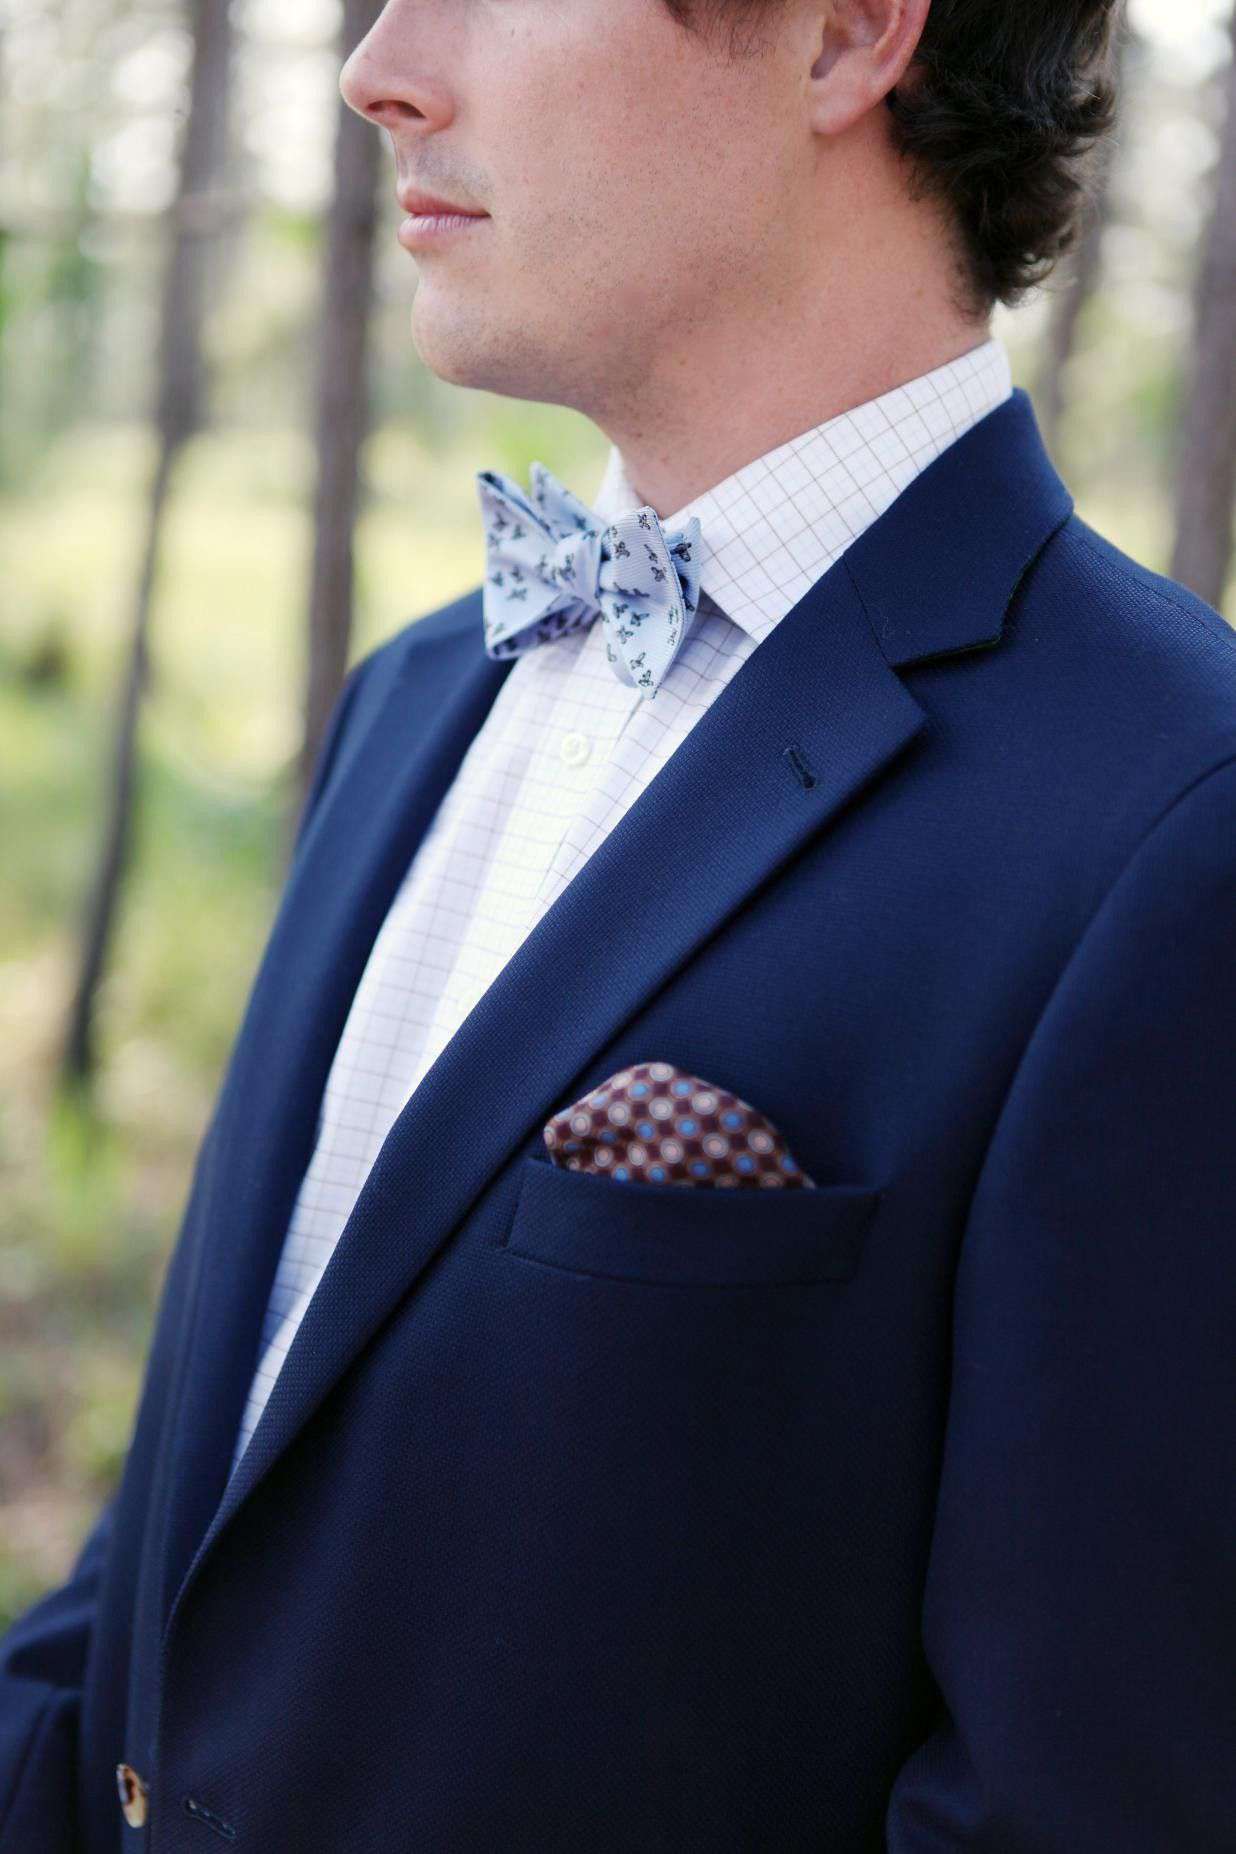 Gentleman's Jacket in Navy by Southern Proper - Country Club Prep